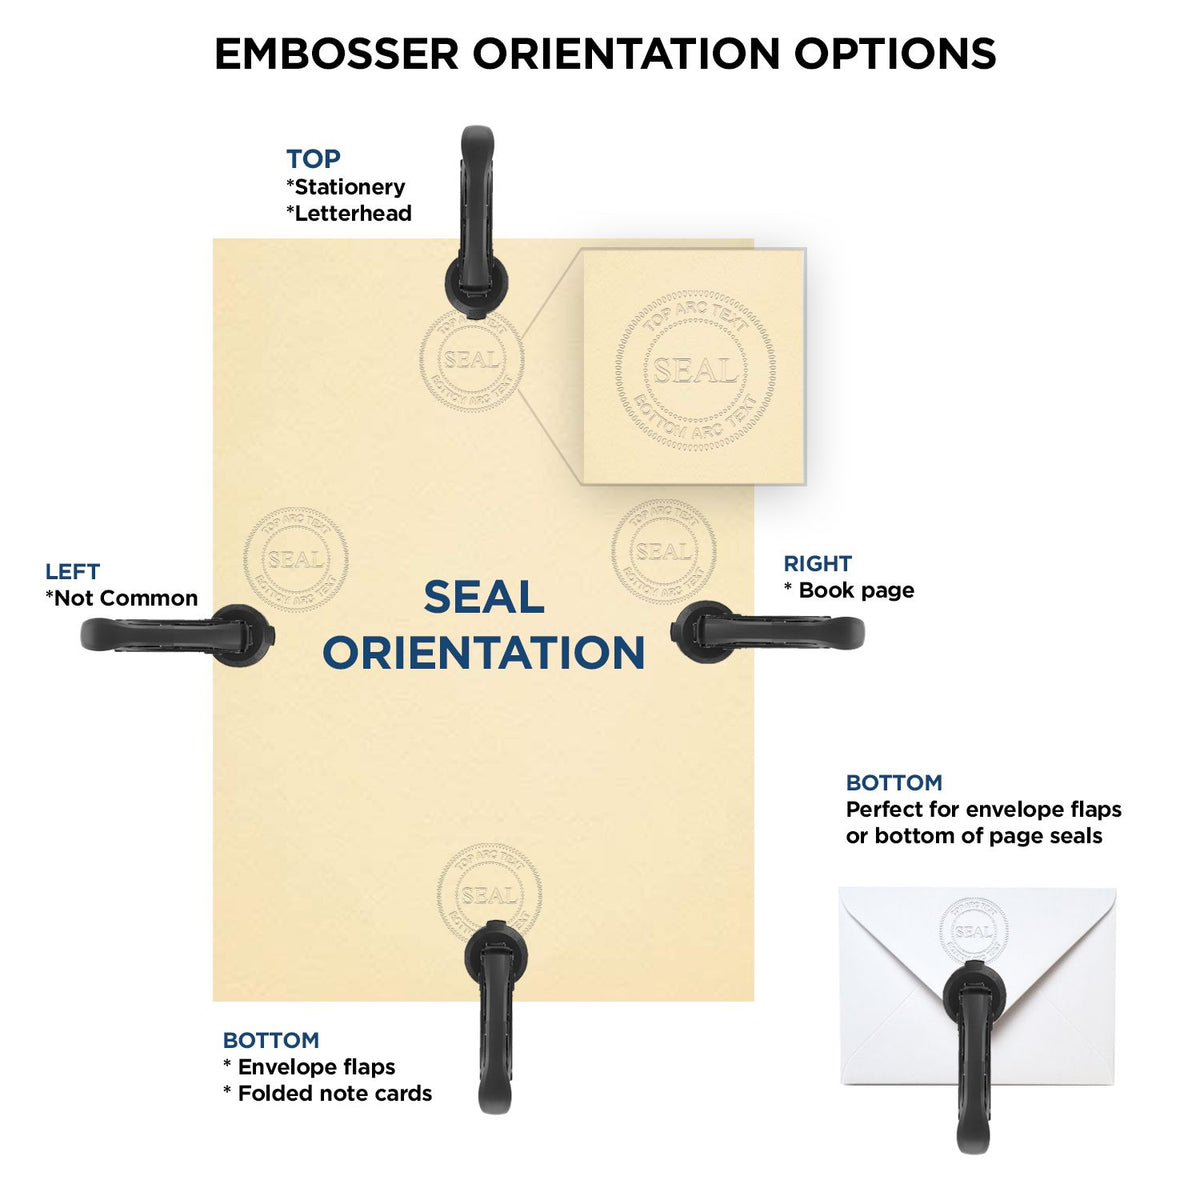 An infographic for the Gift Massachusetts Engineer Seal showing embosser orientation, this is showing examples of a top, bottom, right and left insert.